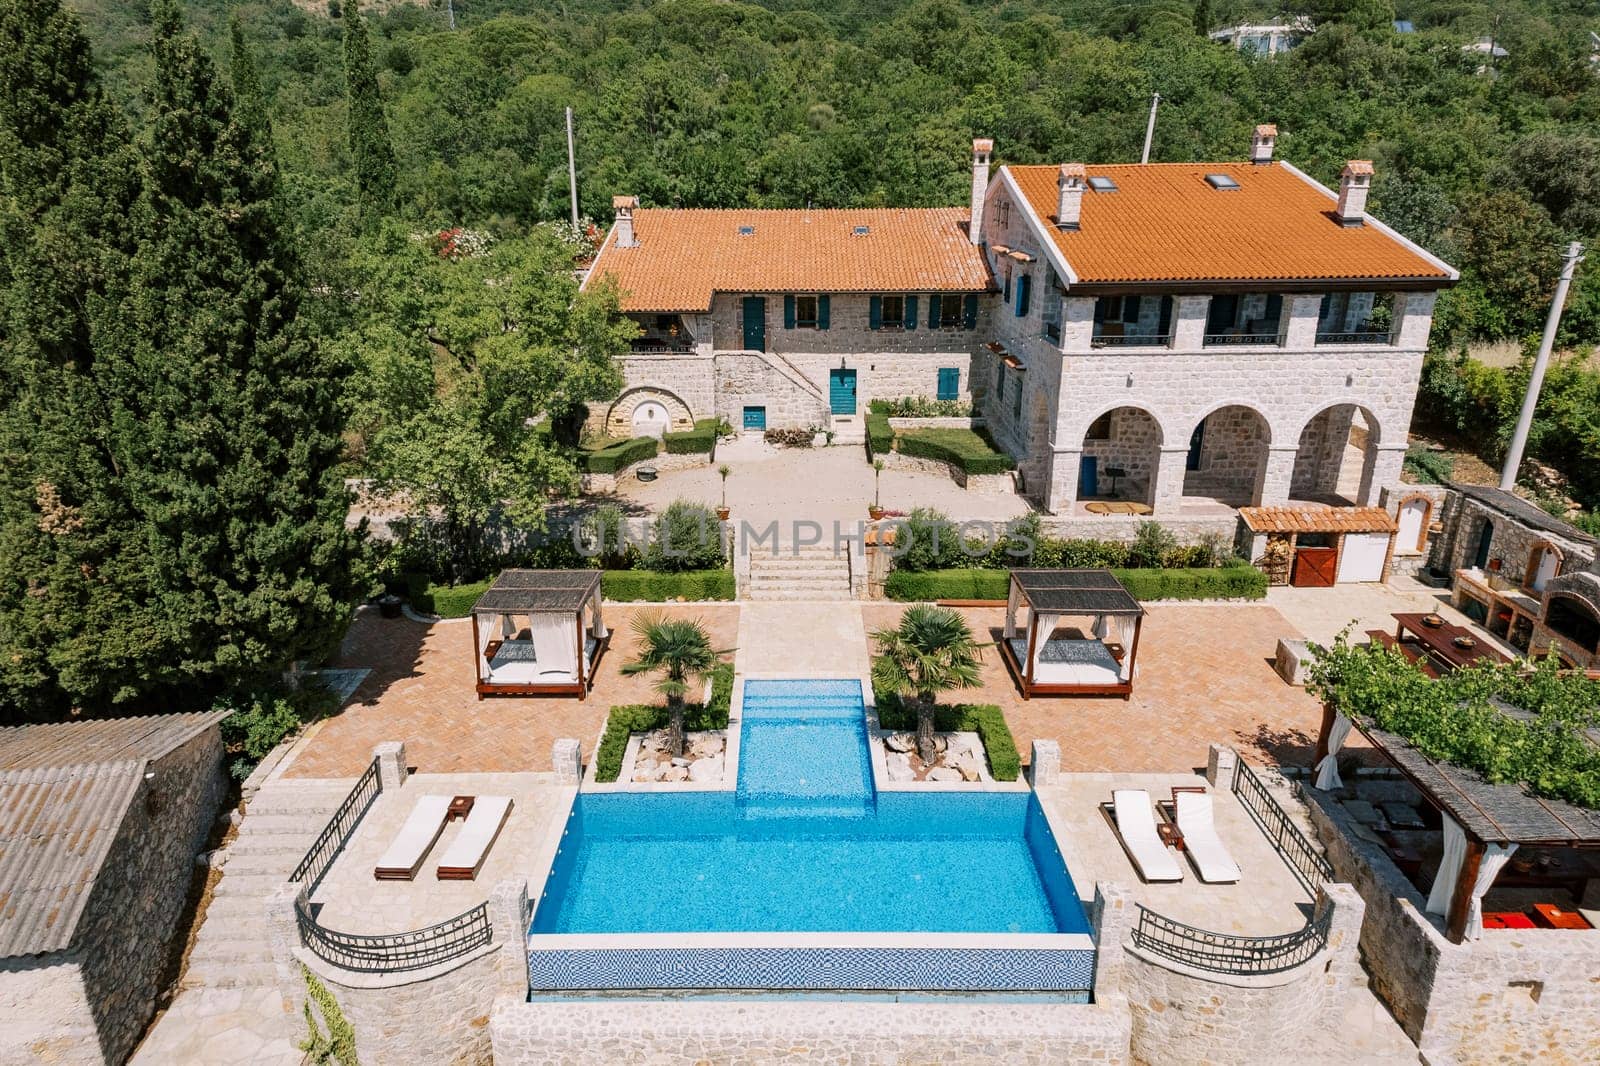 Sun loungers stand near the T-shaped pool in the courtyard of an ancient stone villa in a green garden. Drone by Nadtochiy